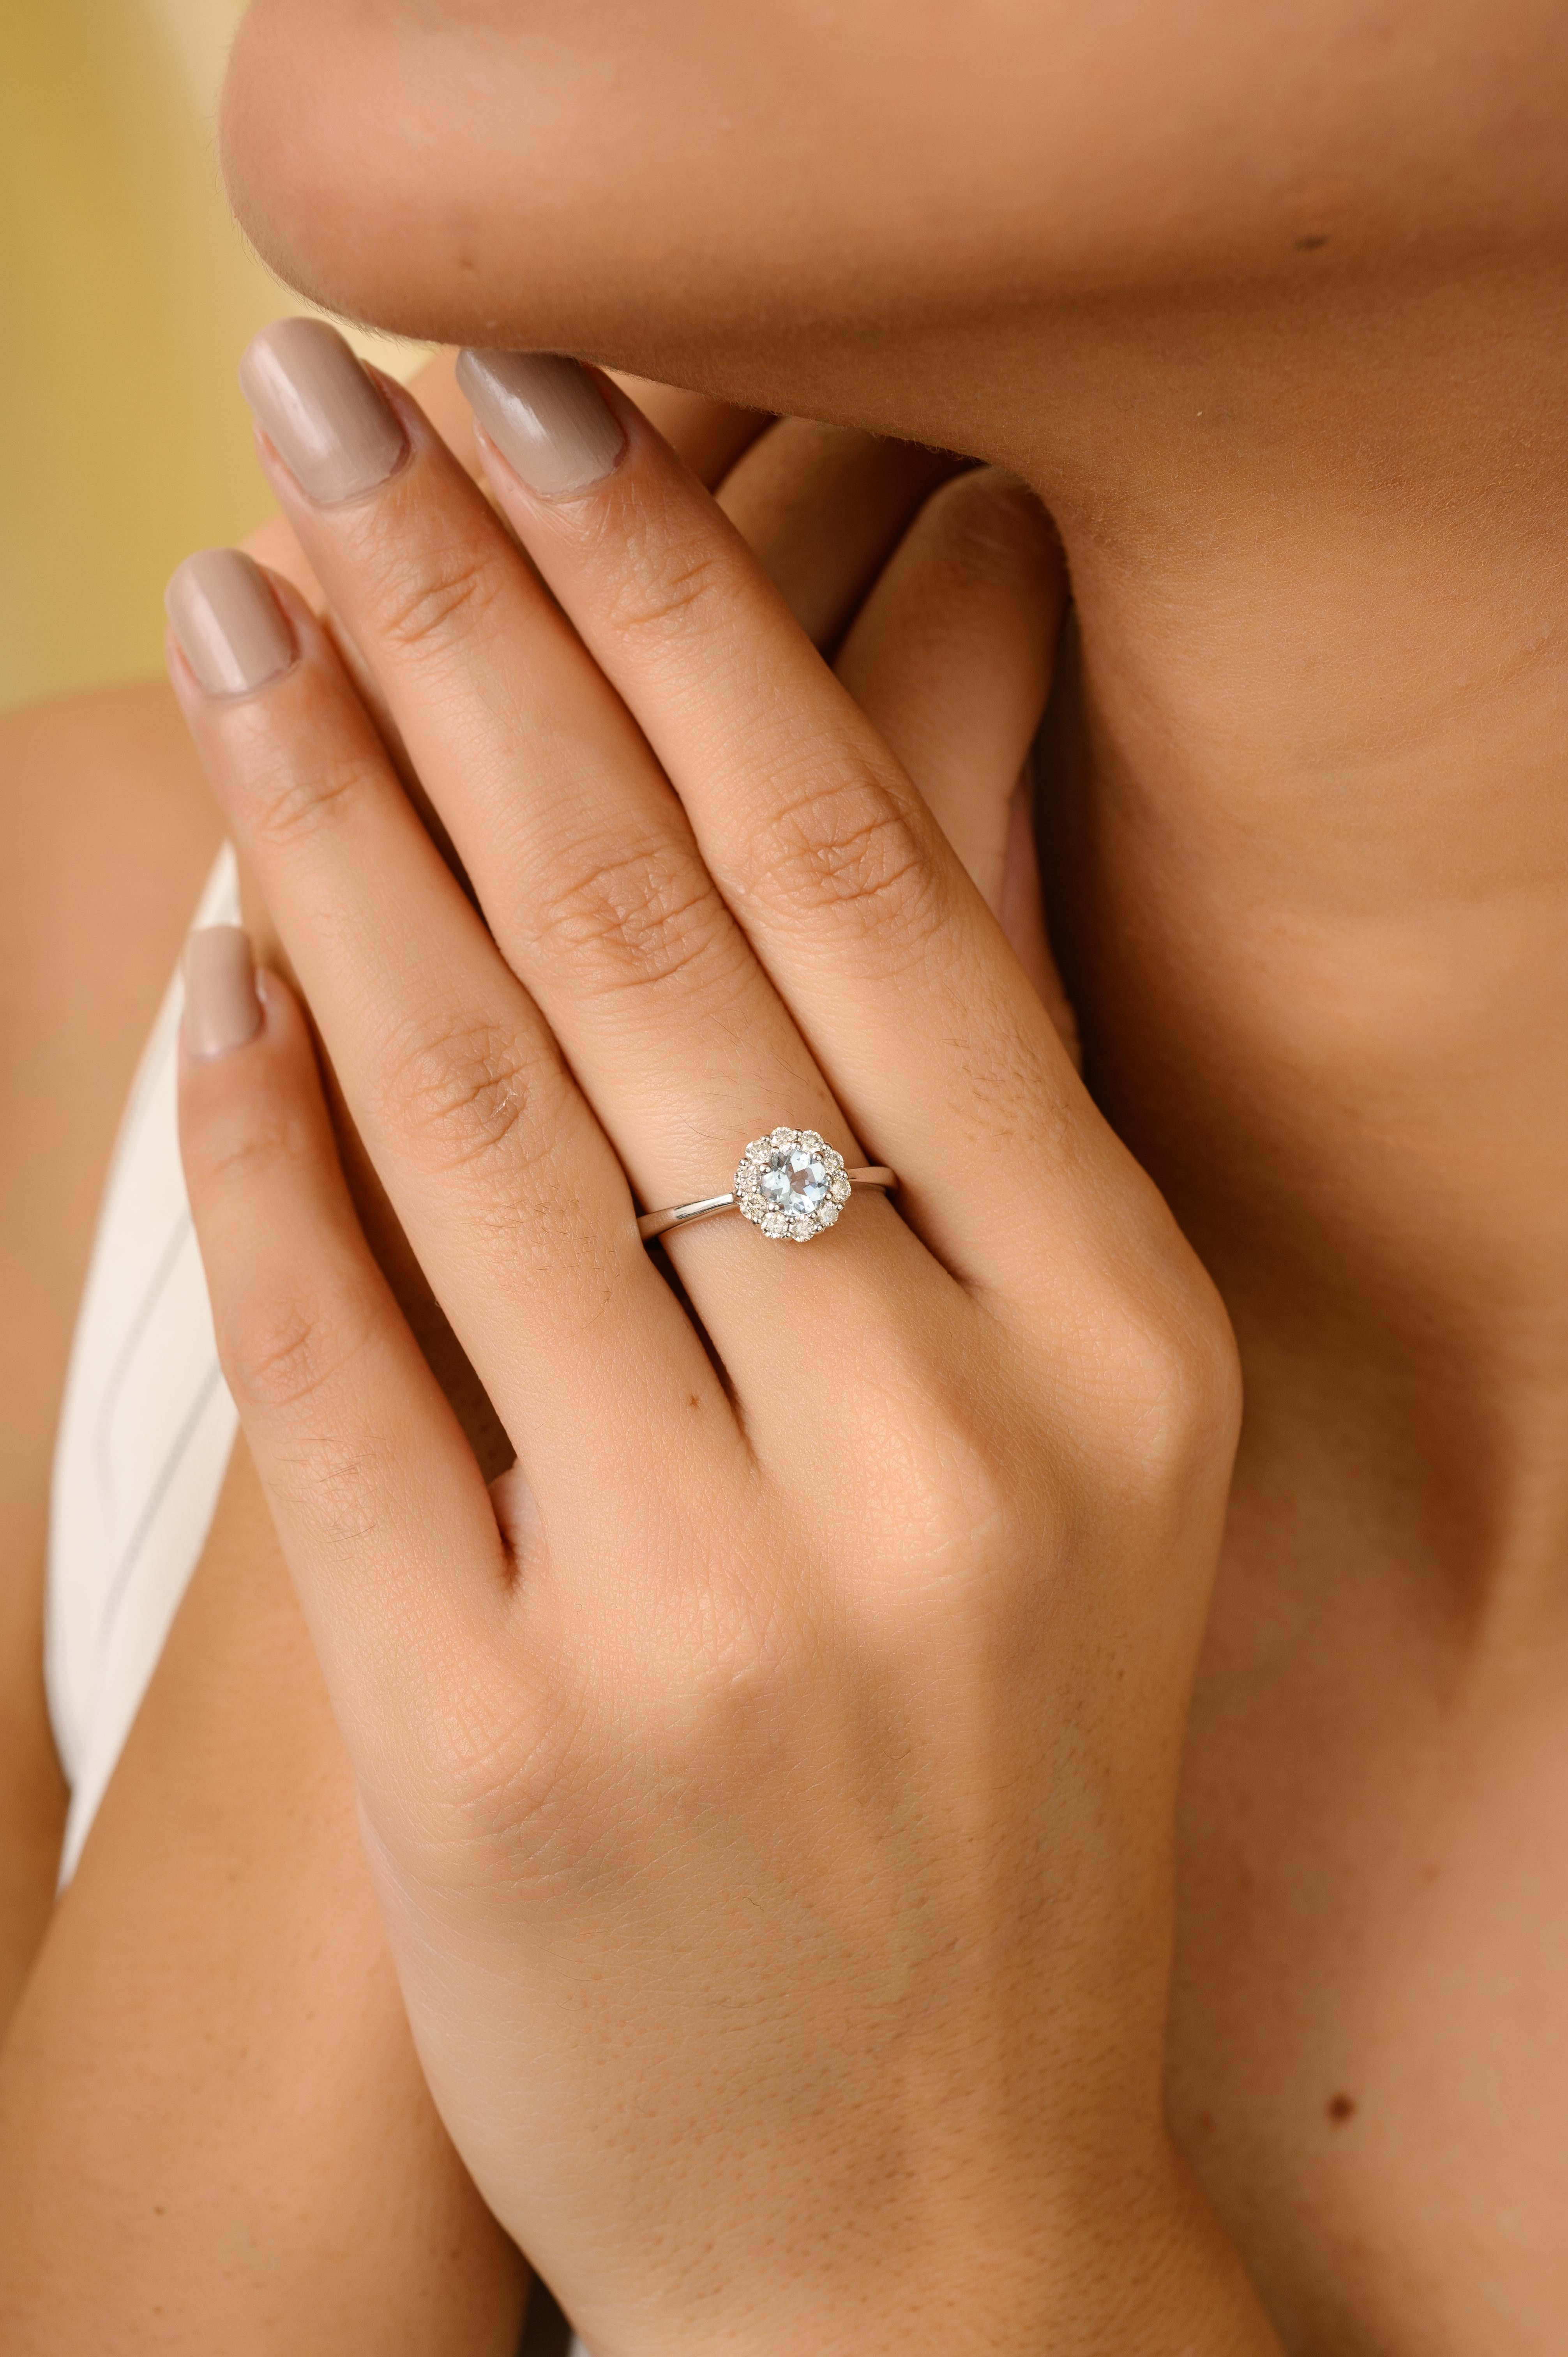 For Sale:  Dainty Aquamarine Halo Diamond Ring Gift for Girlfriend in 14k White Gold 4